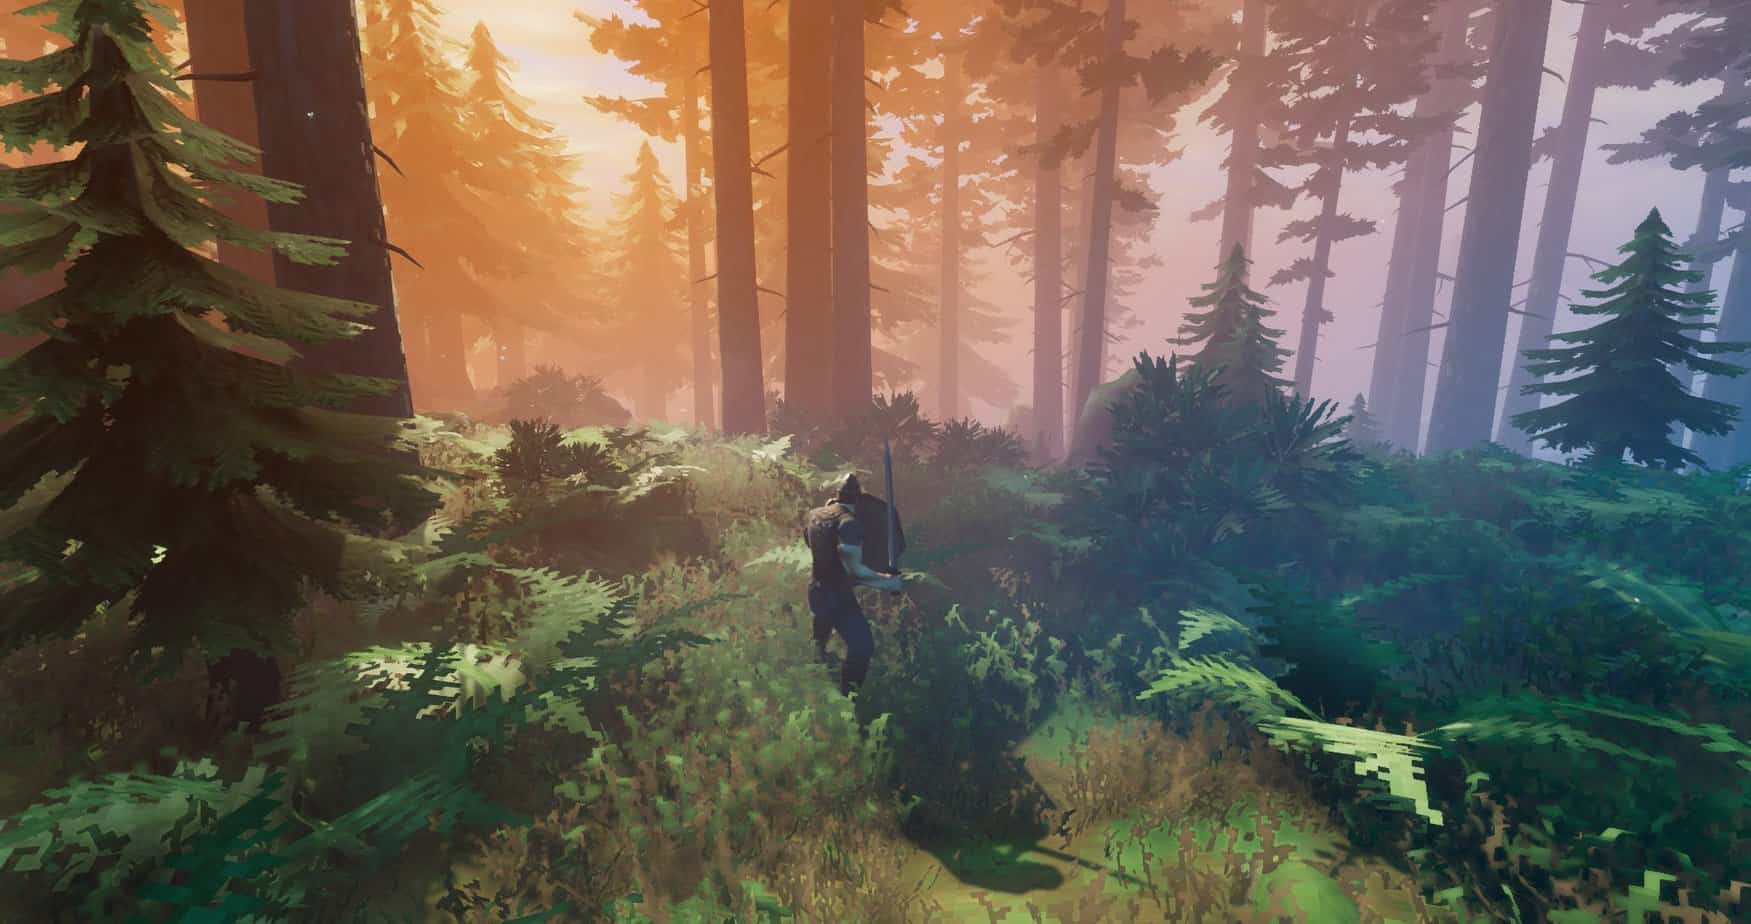 Valheim Screenshot on PC during Early Access